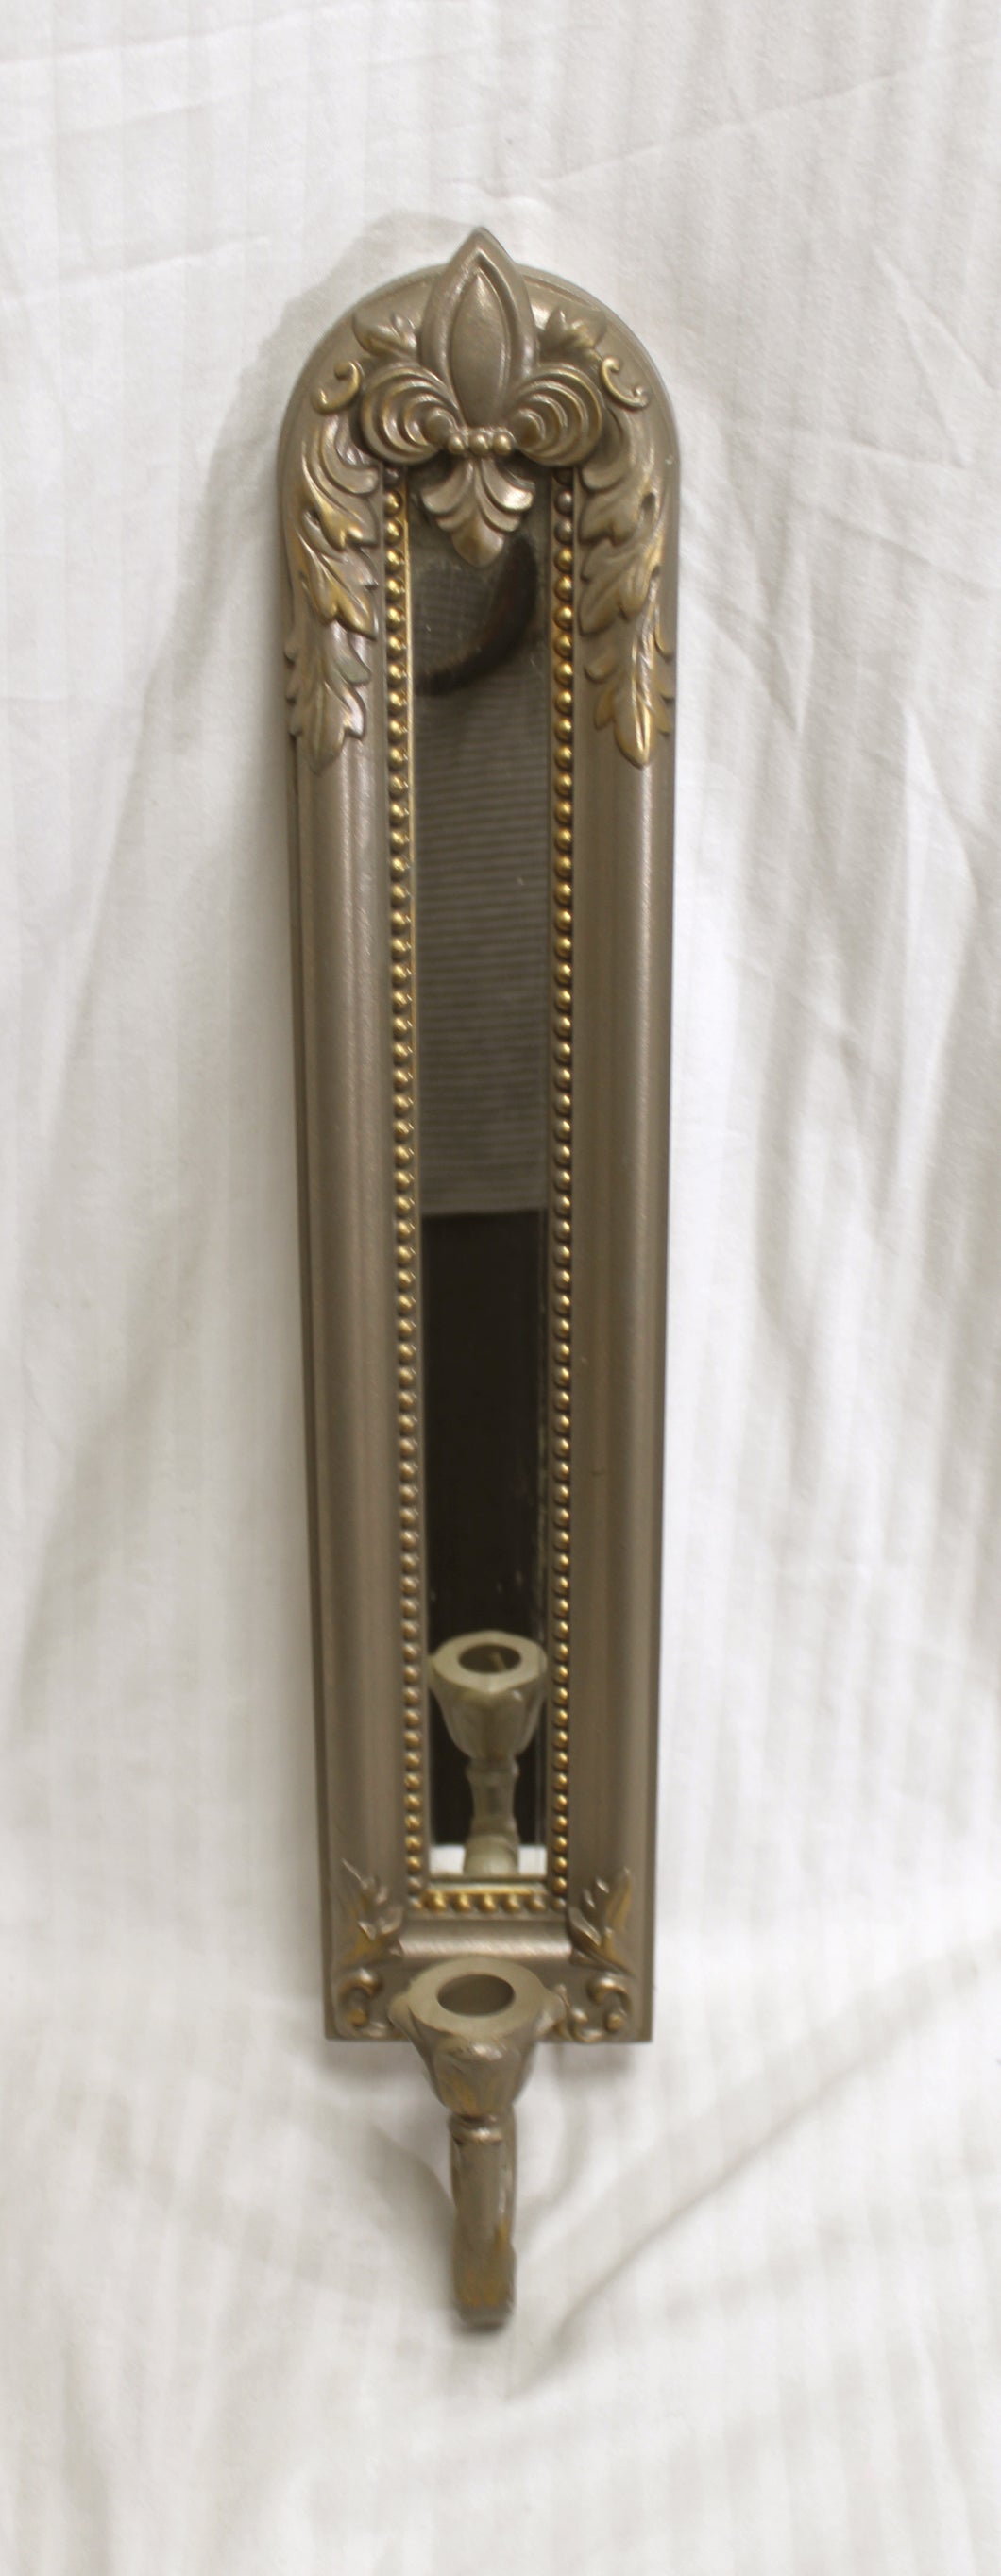 Vintage - Home Interiors & Gifts - Tall Mirrored Taper Candle Sconce - 23